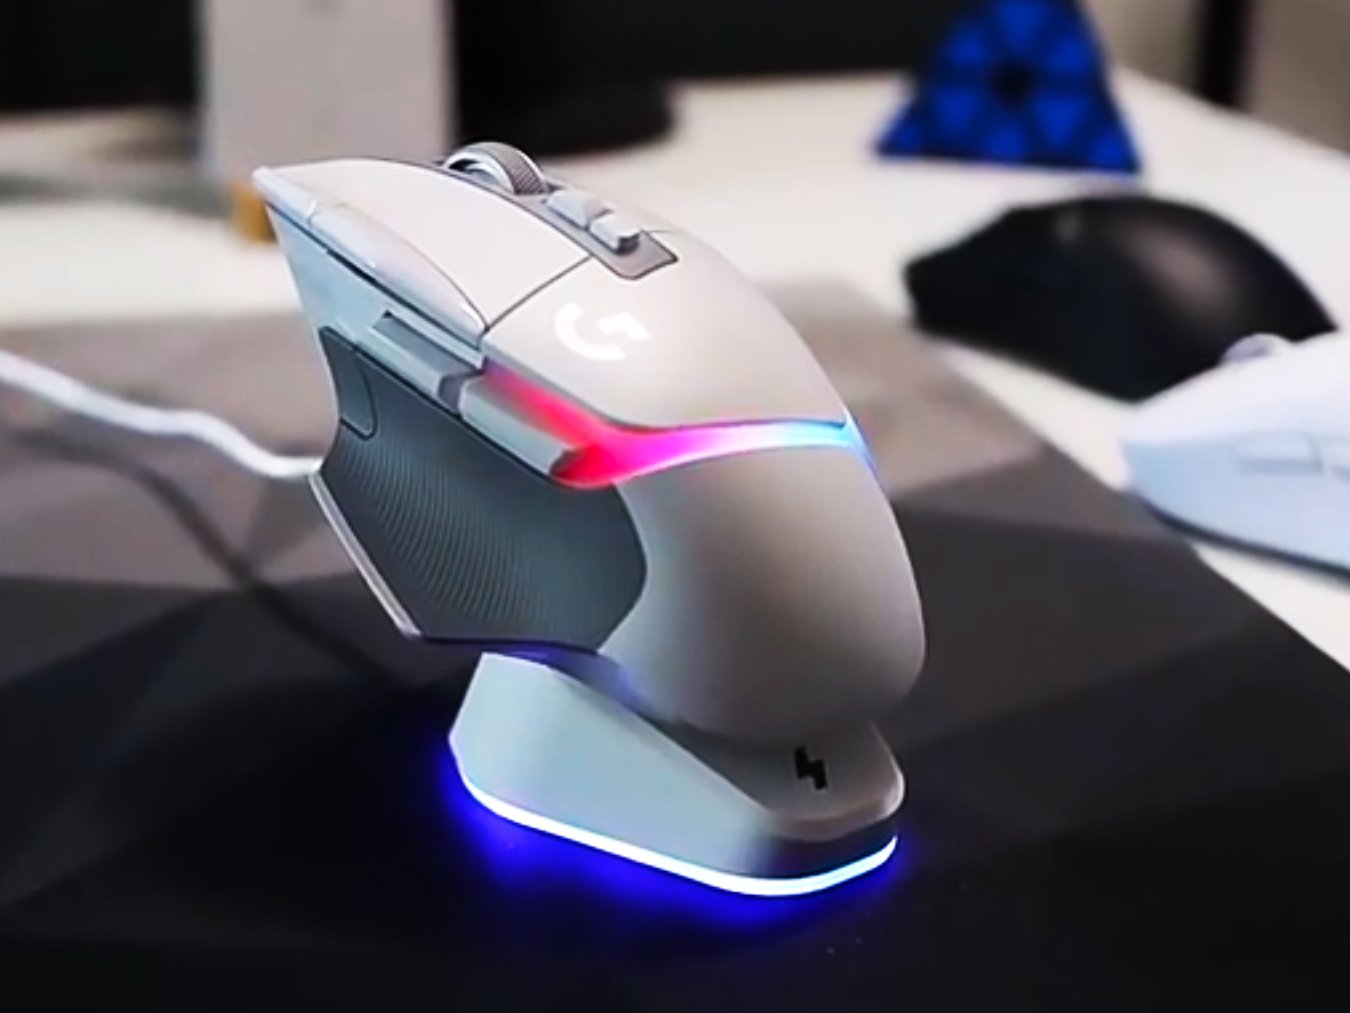 Mouse accessories